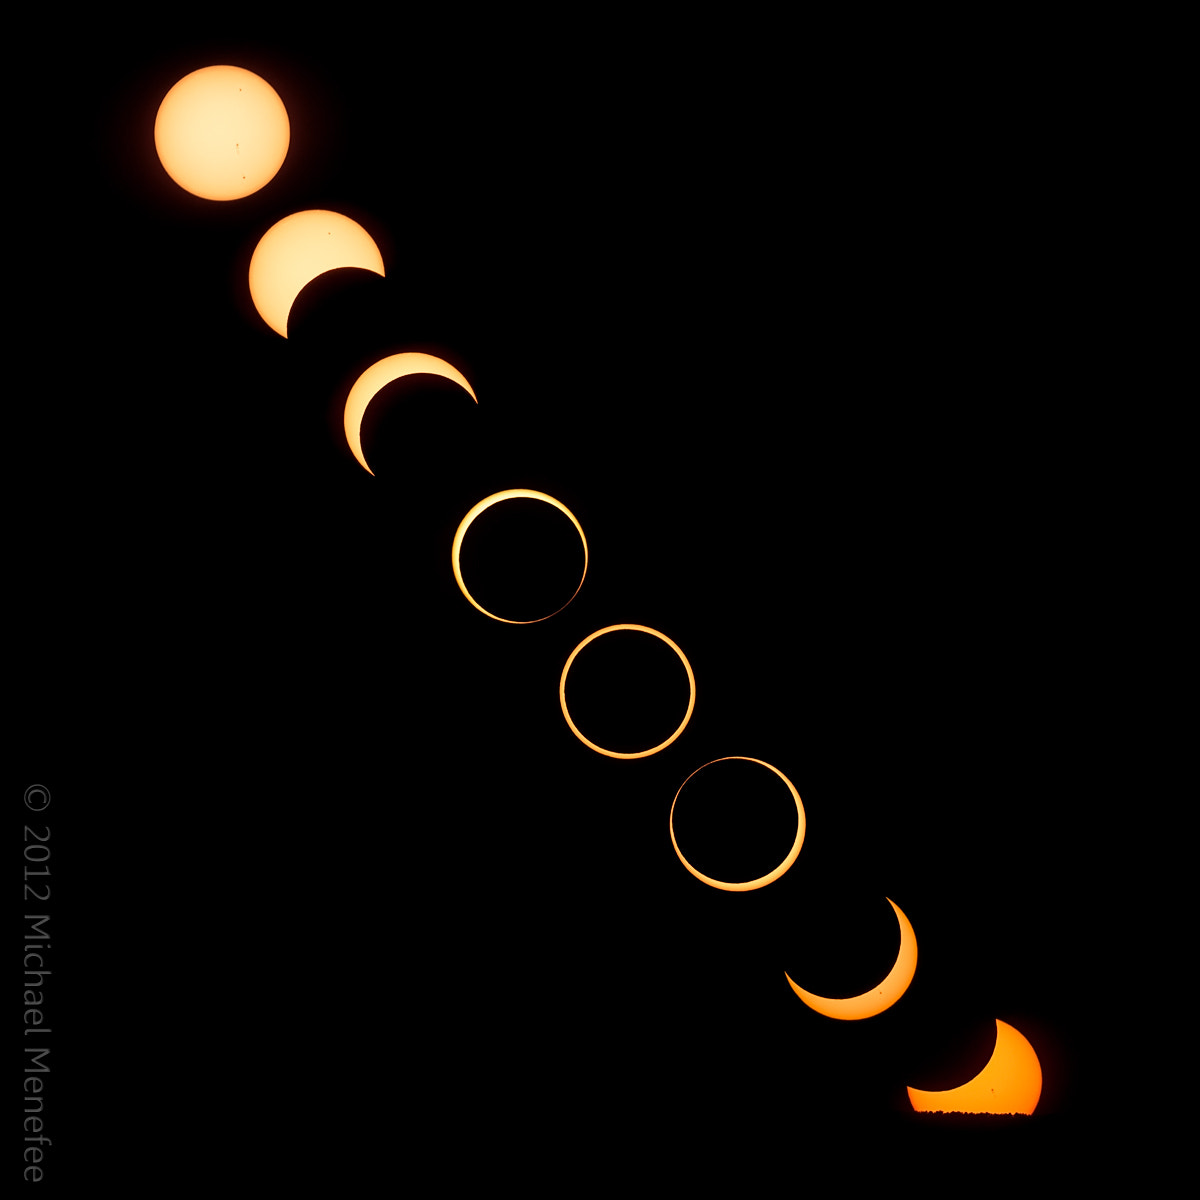 The Setting of the Annular Solar Eclipse of 2012, May 20